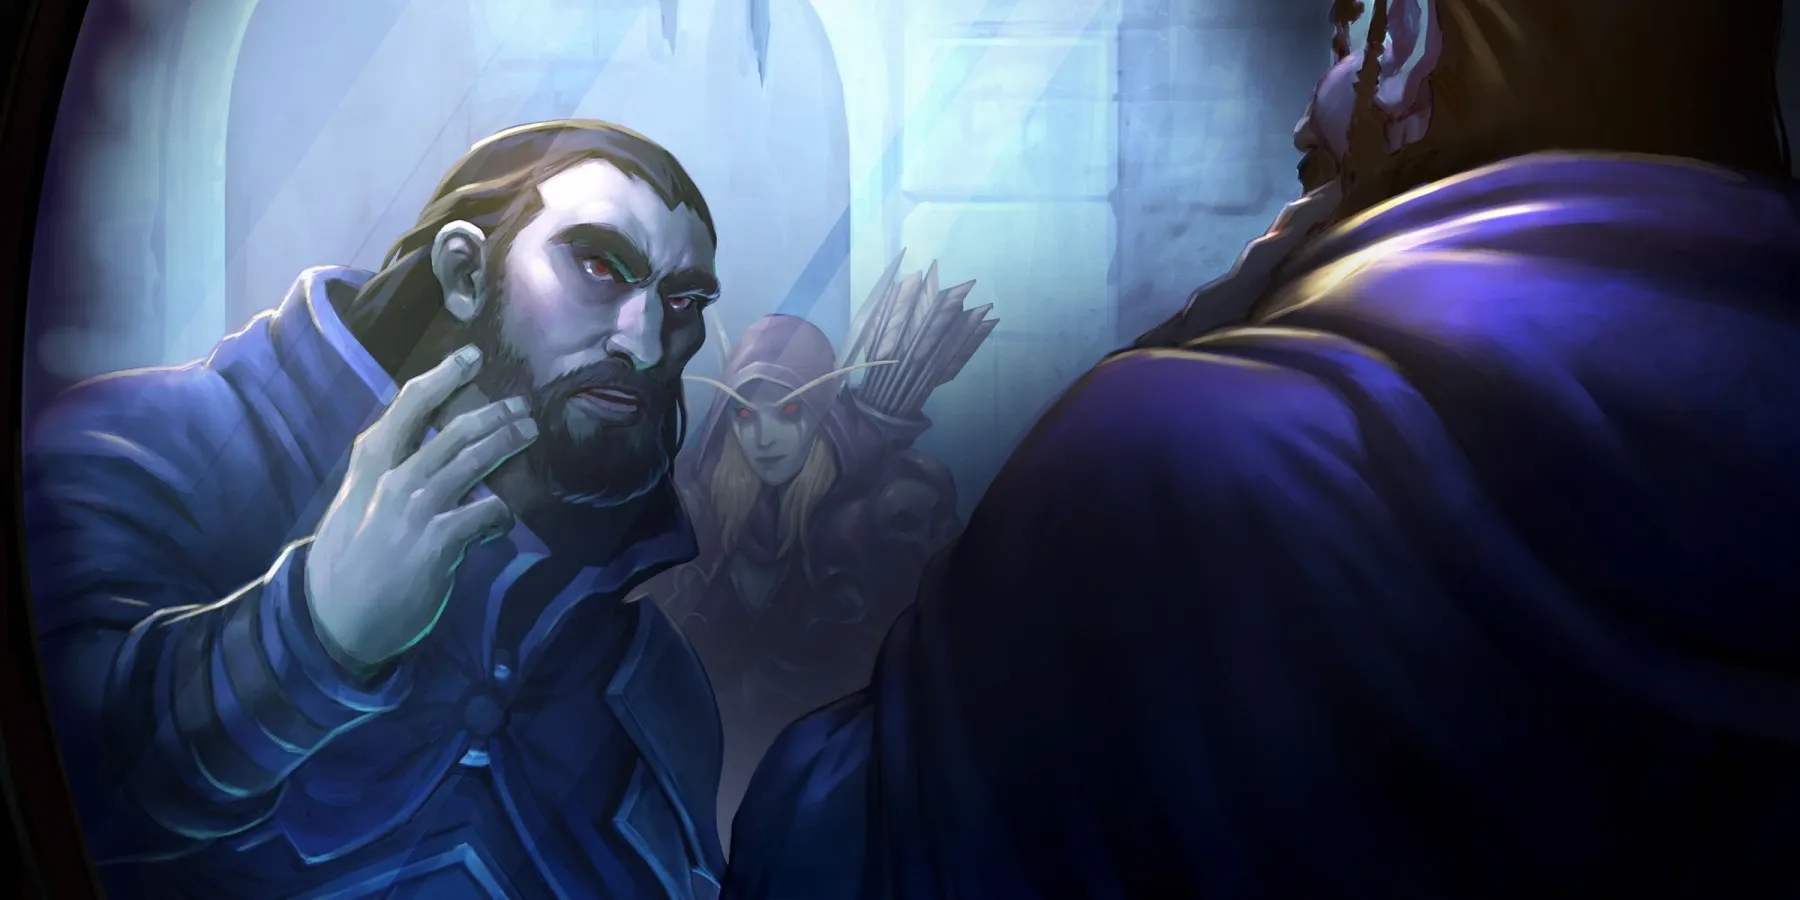 nathanos marris blightcaller from wow looking into a mirror with sylvanas behind him